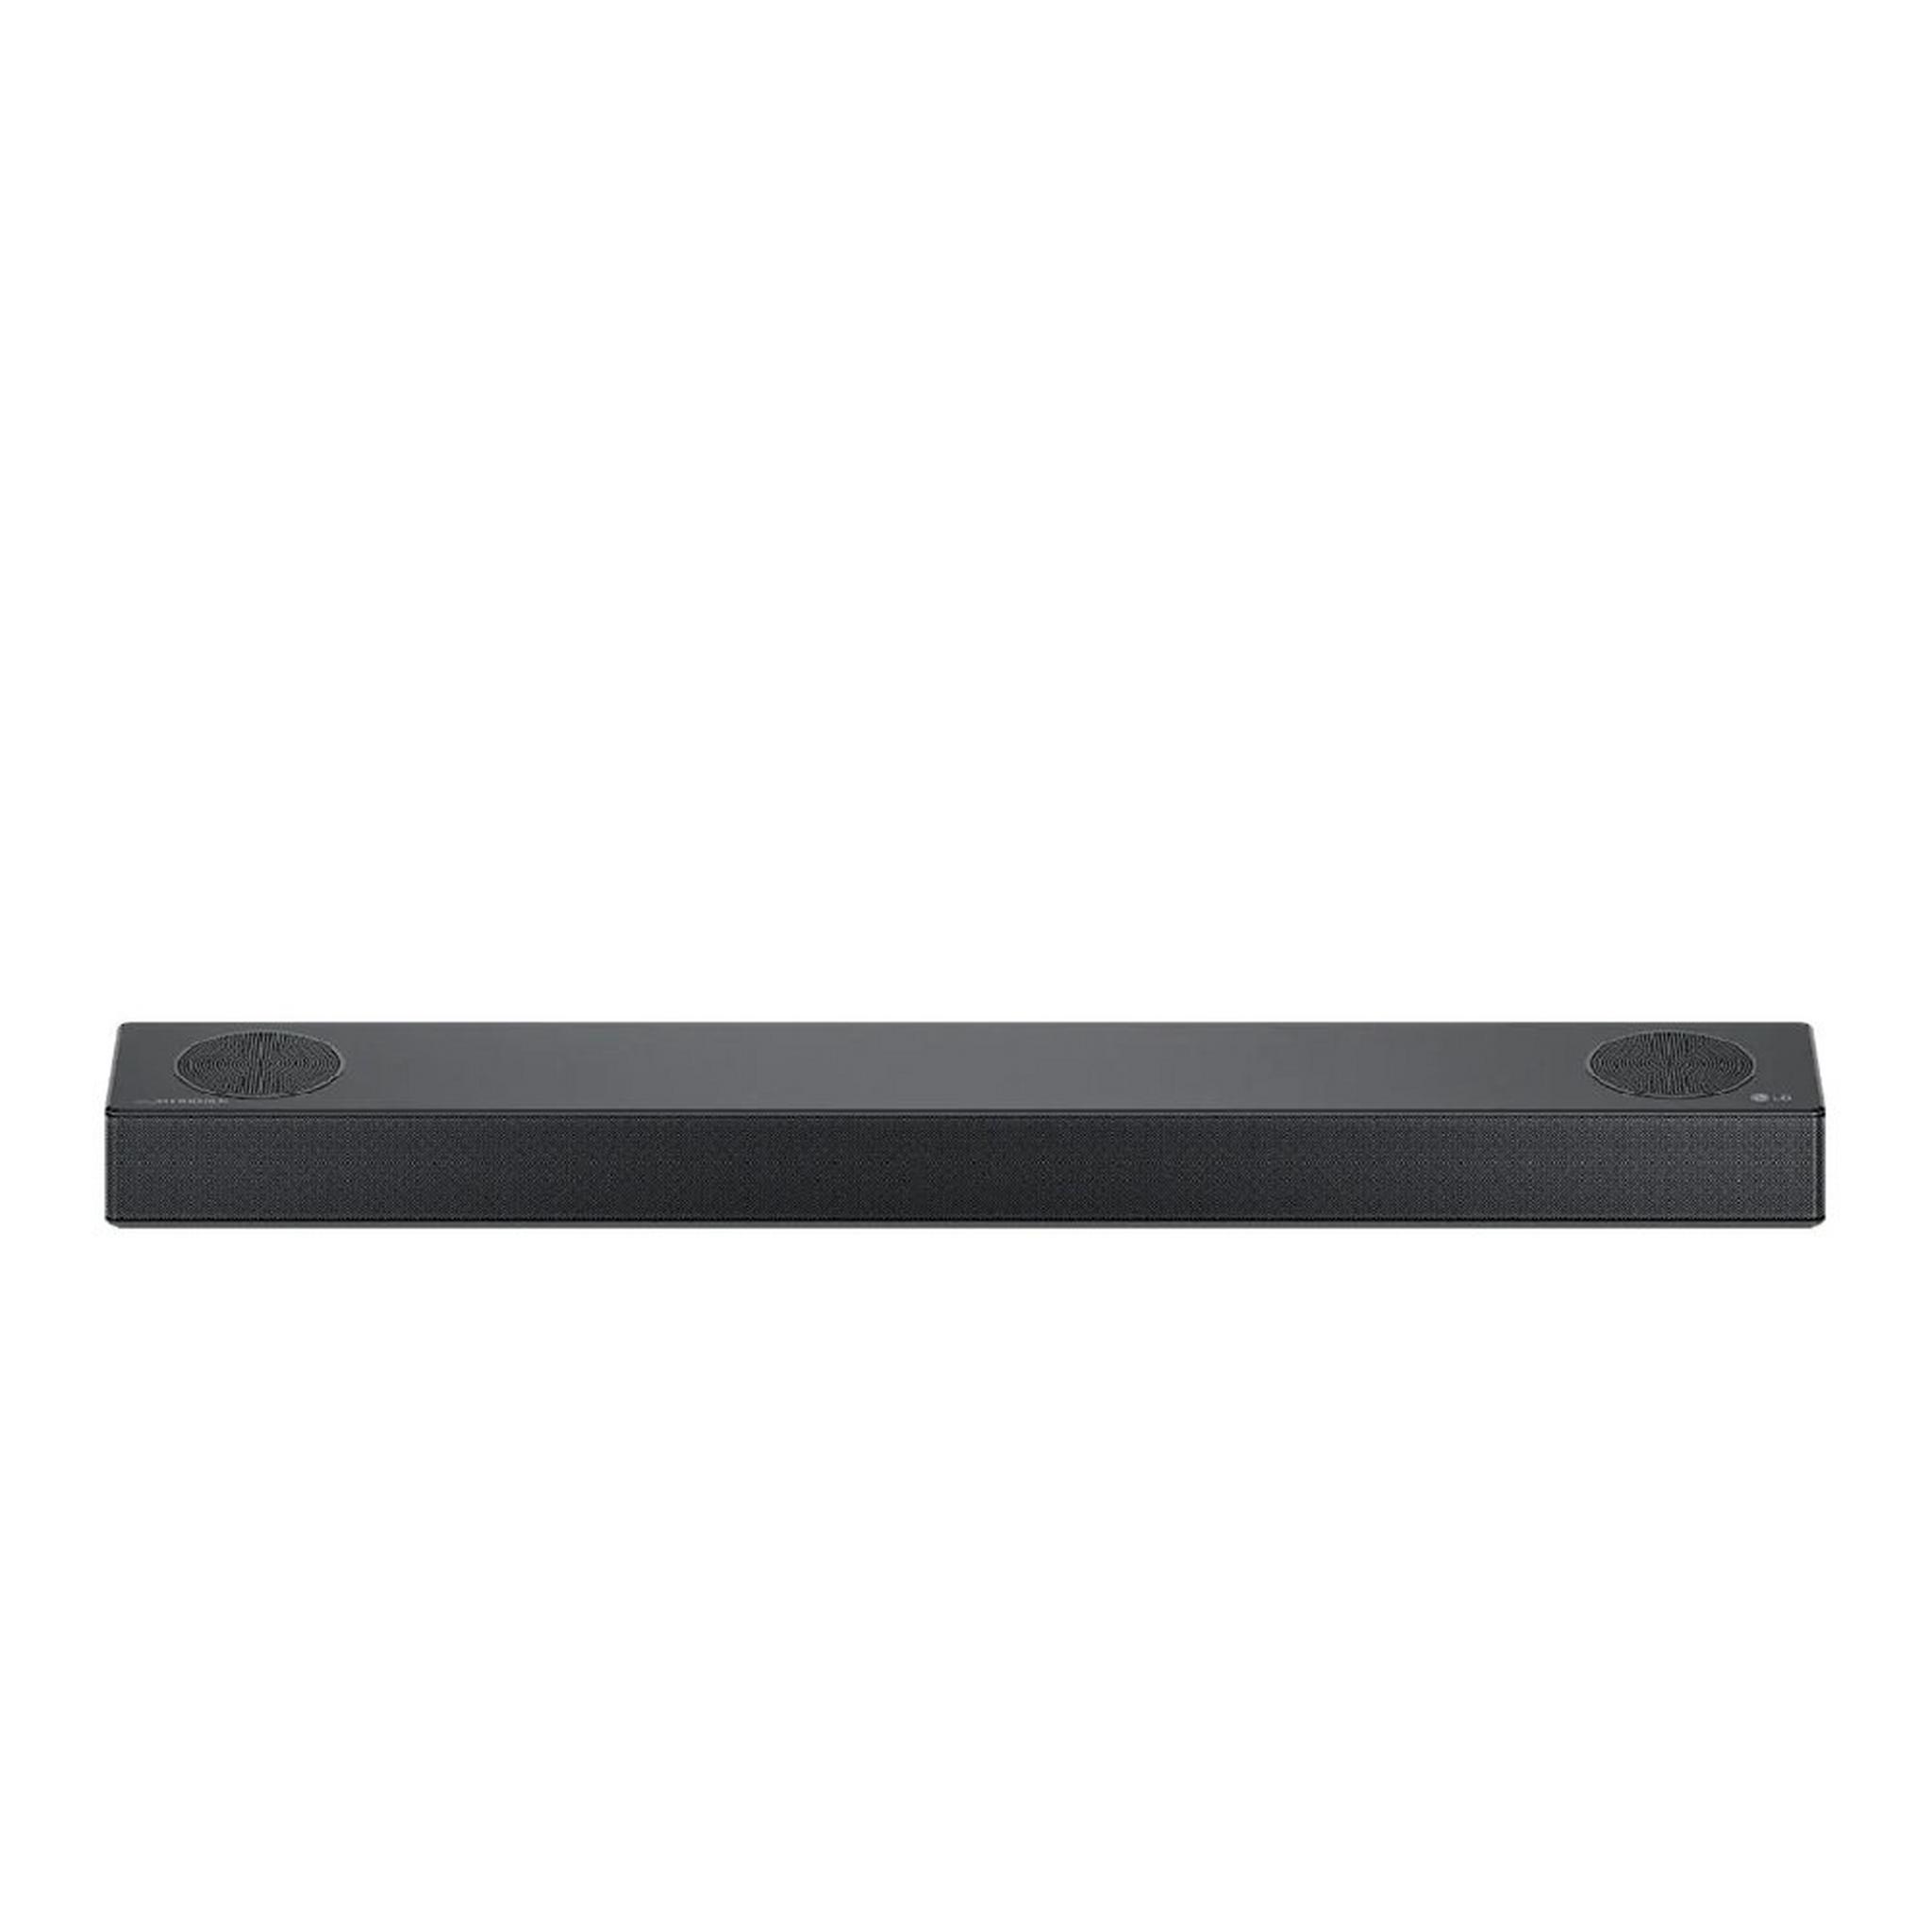 LG Sound Bar, Subwoofer and Surround Speakers, 5.1.2 Channel, 520 Watts, S75QR – Black